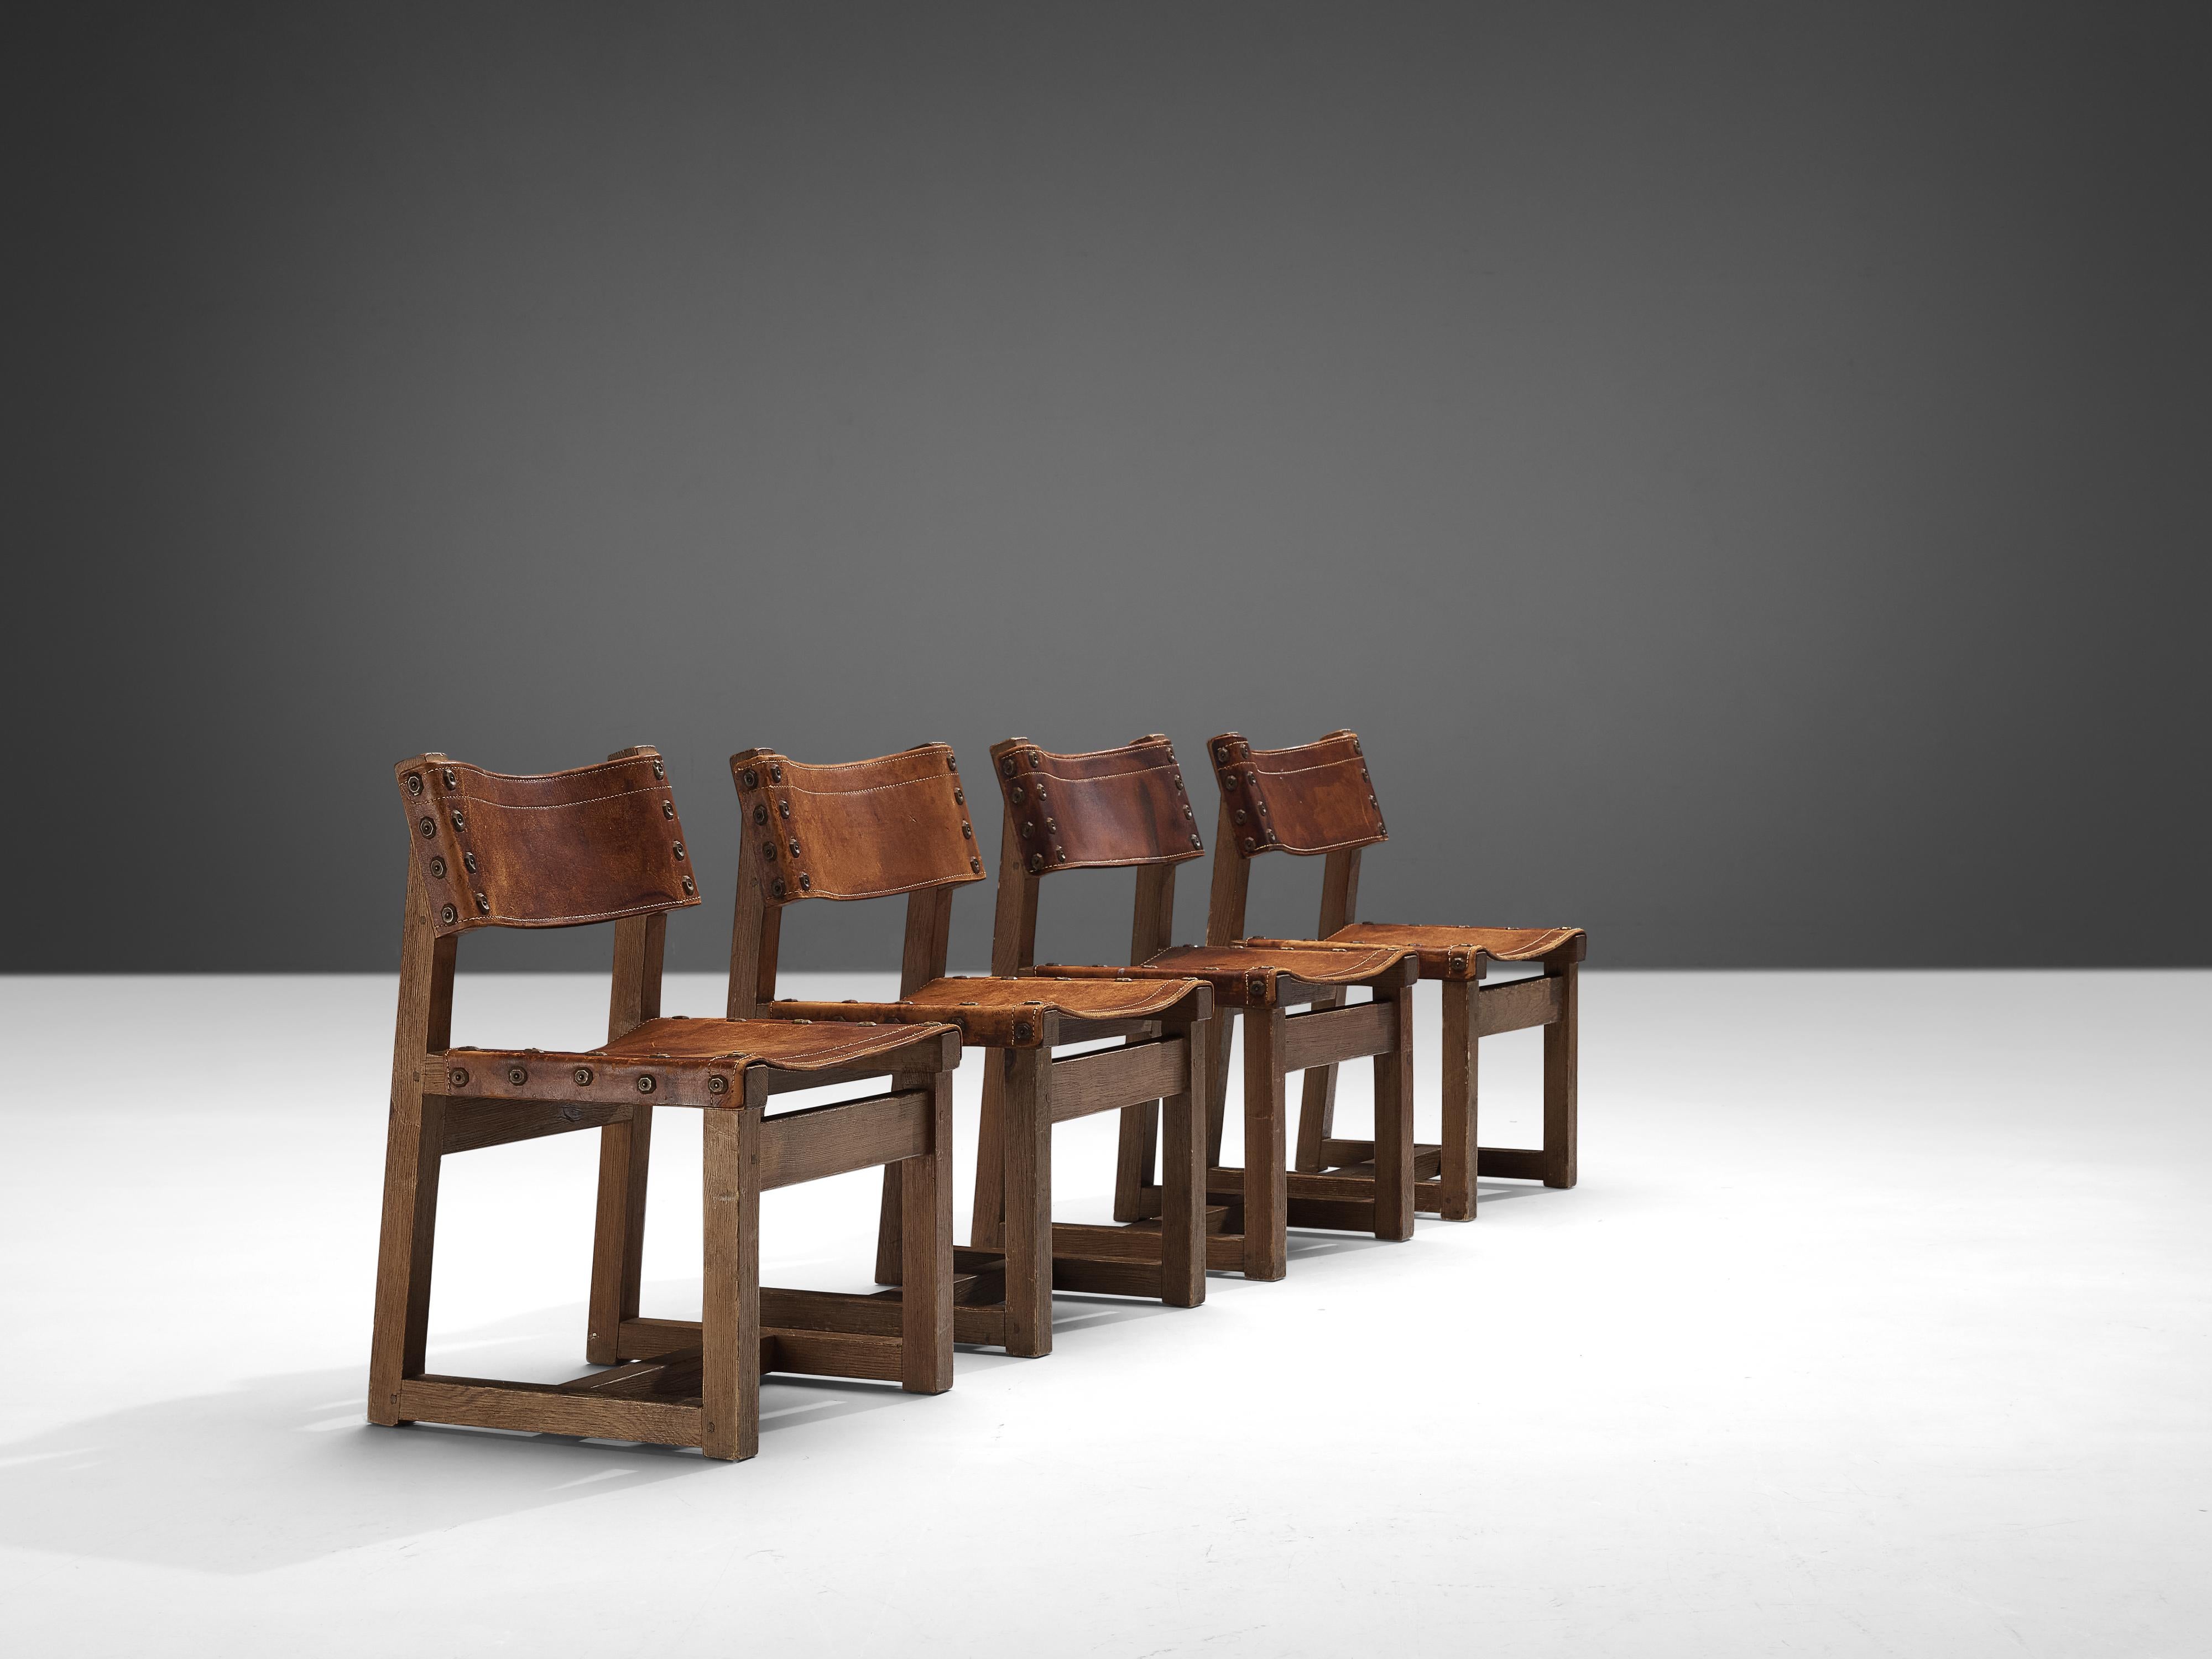 Mid-20th Century Brutalist Spanish Biosca Set of Four Dining chairs in Cognac Leather